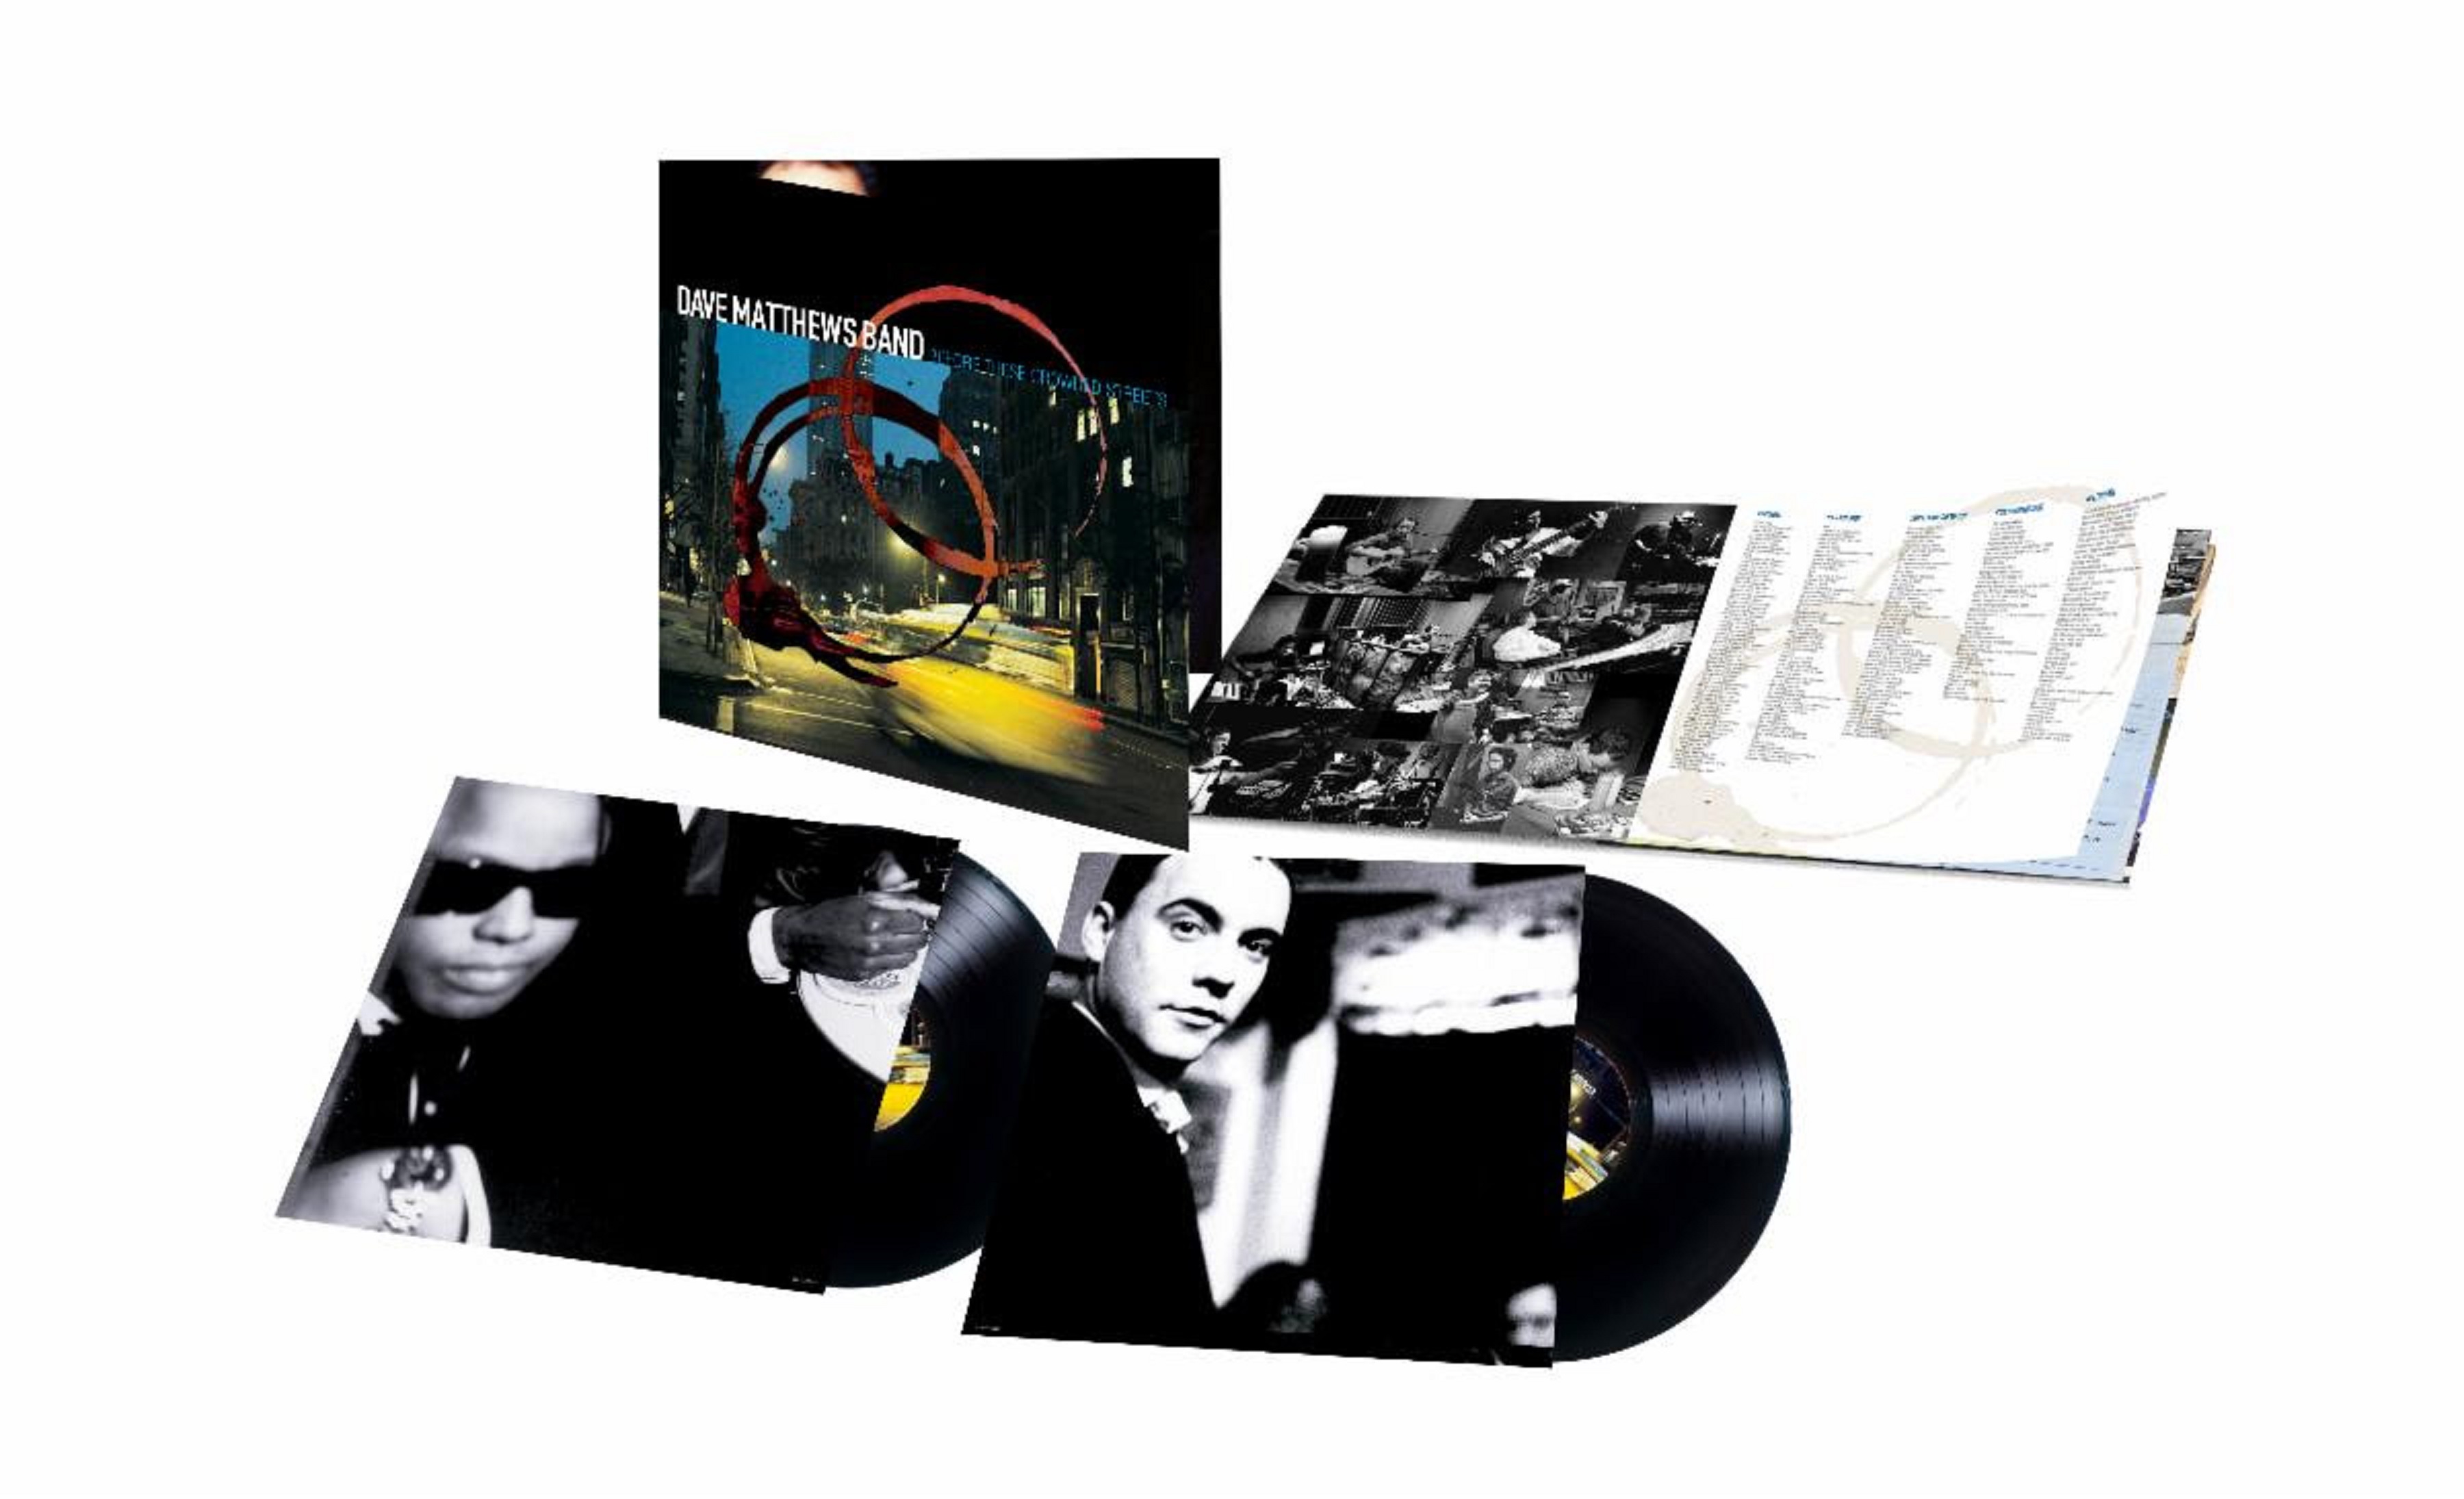 Dave Matthews Band Announces 'Before These Crowded Streets' 25th Anniversary Vinyl